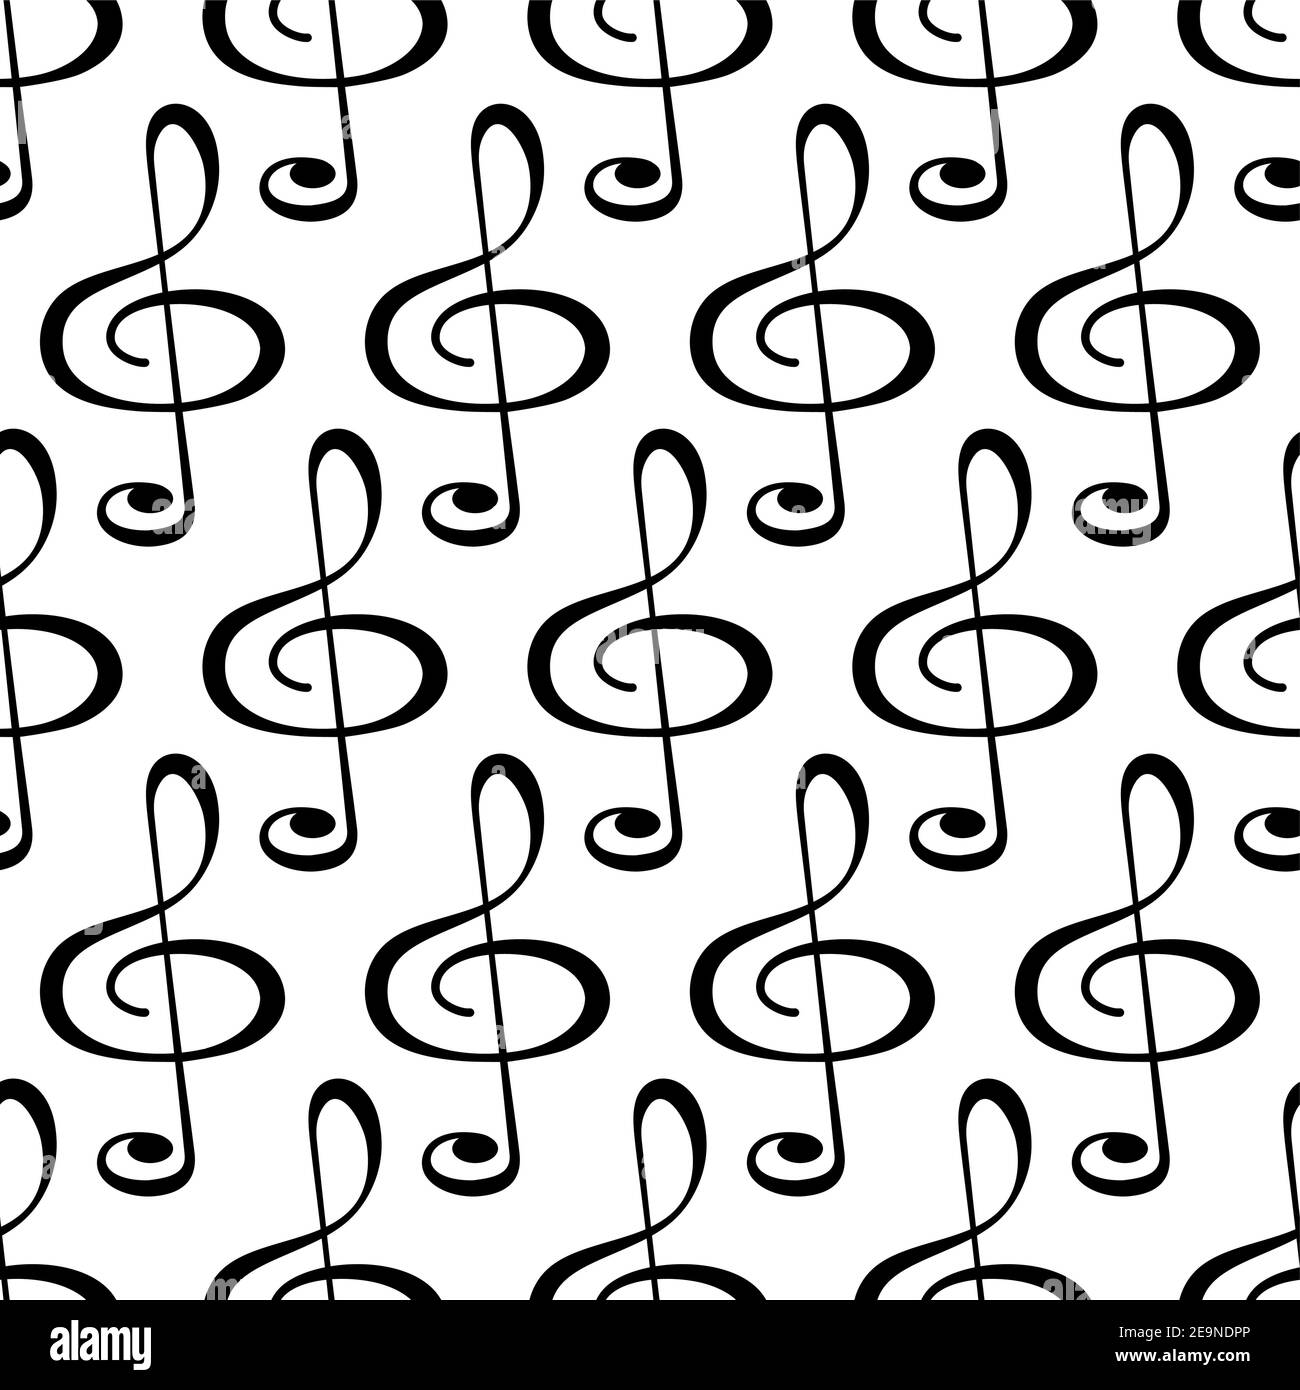 Seamless pattern of the treble clef symbols Stock Vector